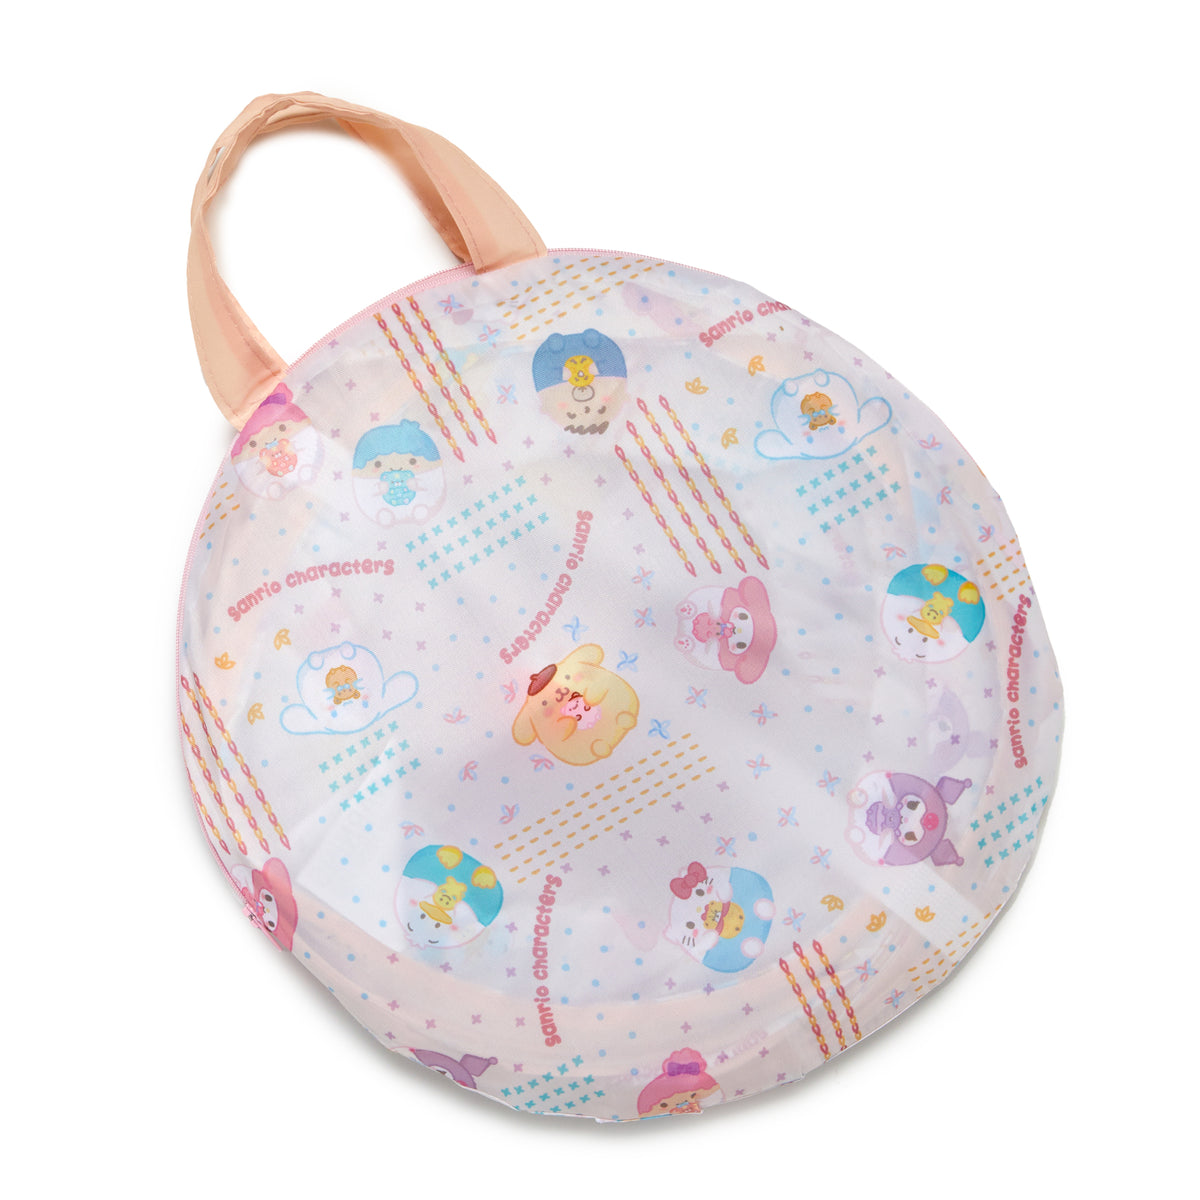 Sanrio Characters Pet Tunnel (Sanrio Pet Collection) Home Goods Global Original   